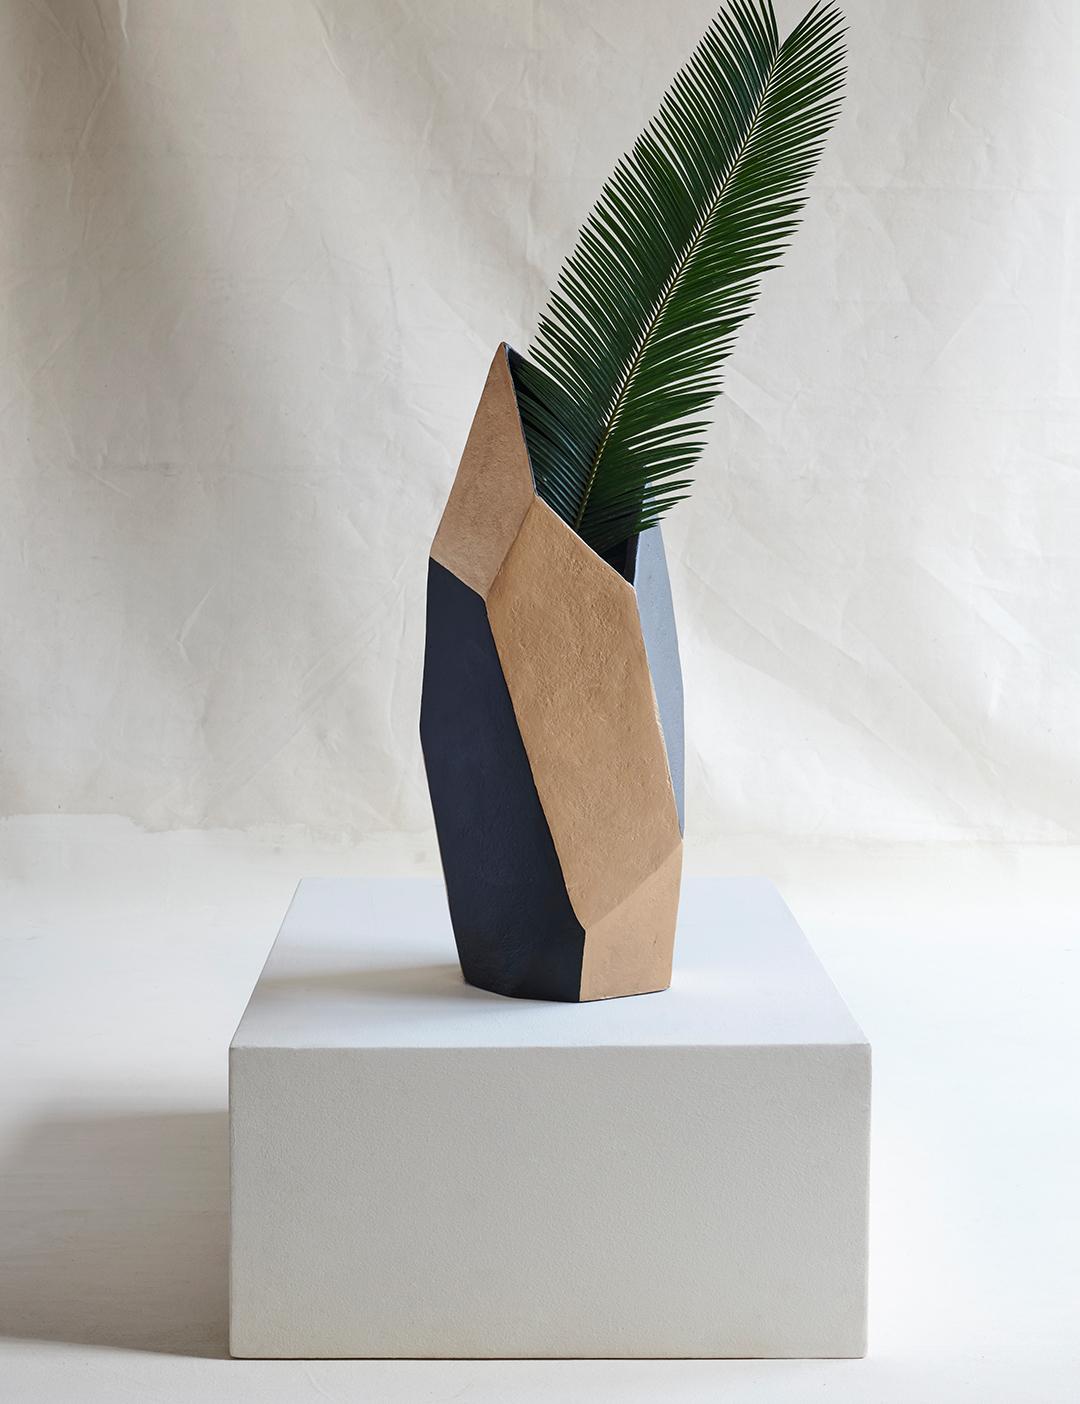 A medium-sized, multi-faceted and angular geometric vessel that is as lightweight and durable as it is visually dynamic.

For indoor or outdoor use, in covered environments.

Dimensions (in): 5.2